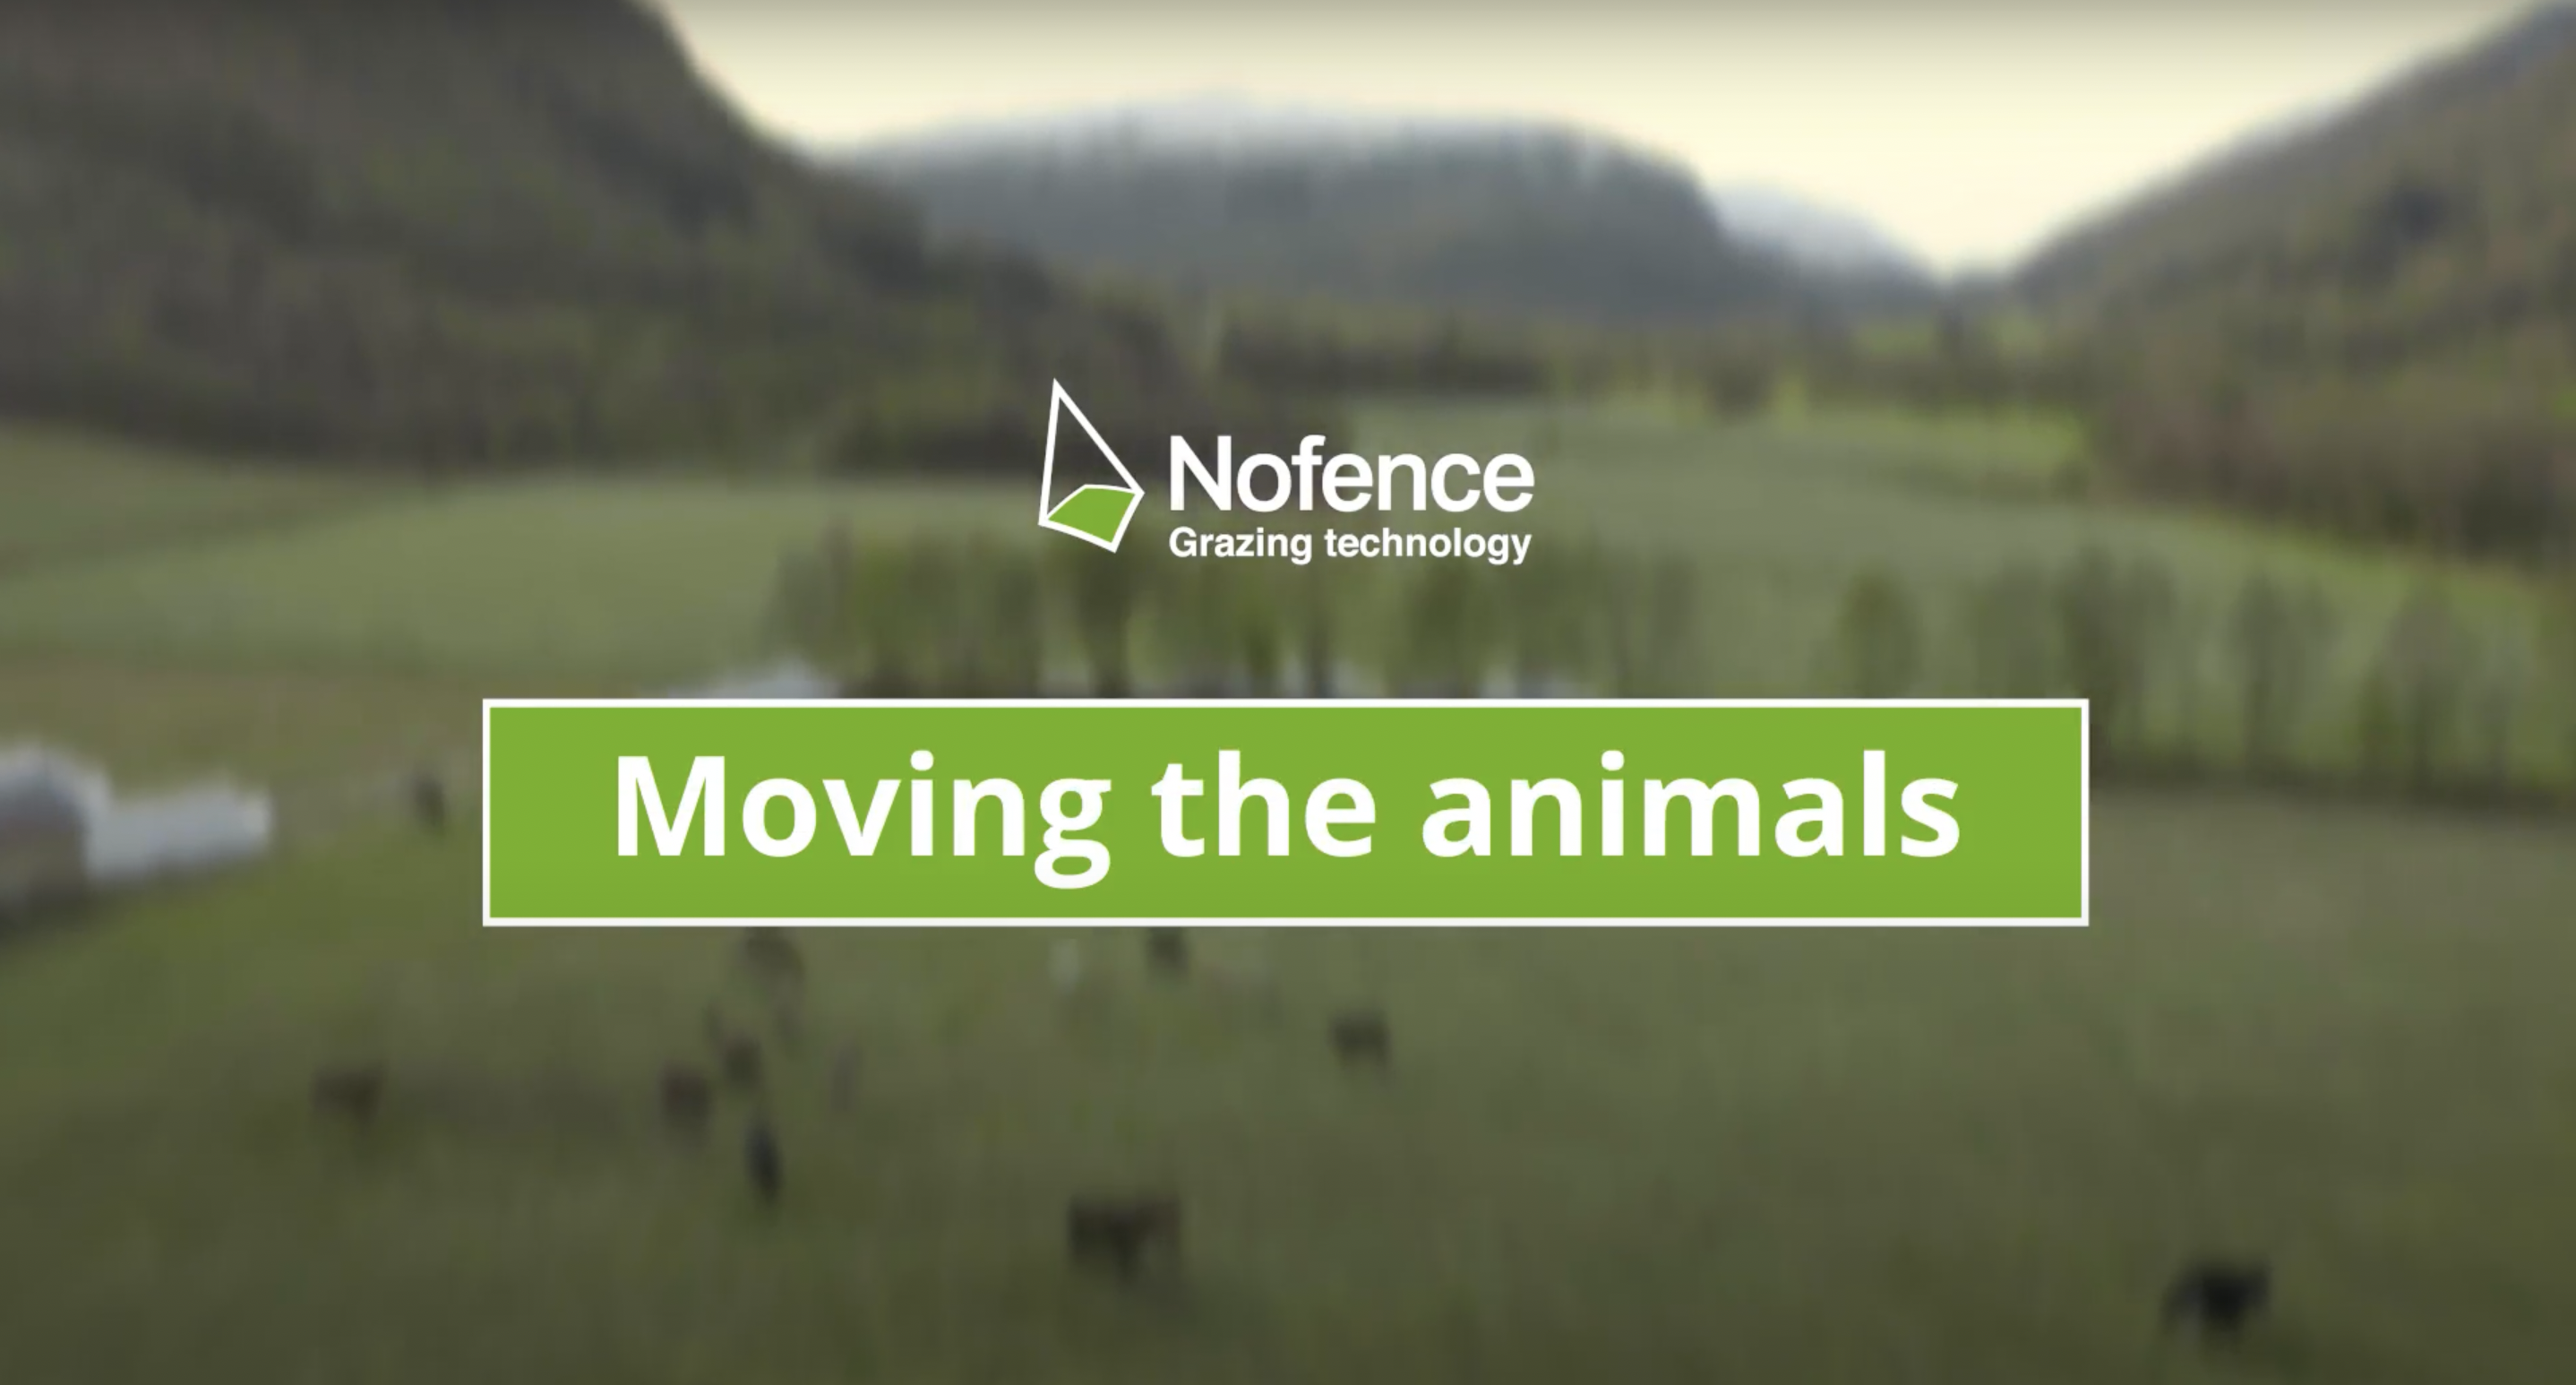 Moving the animals with Nofence